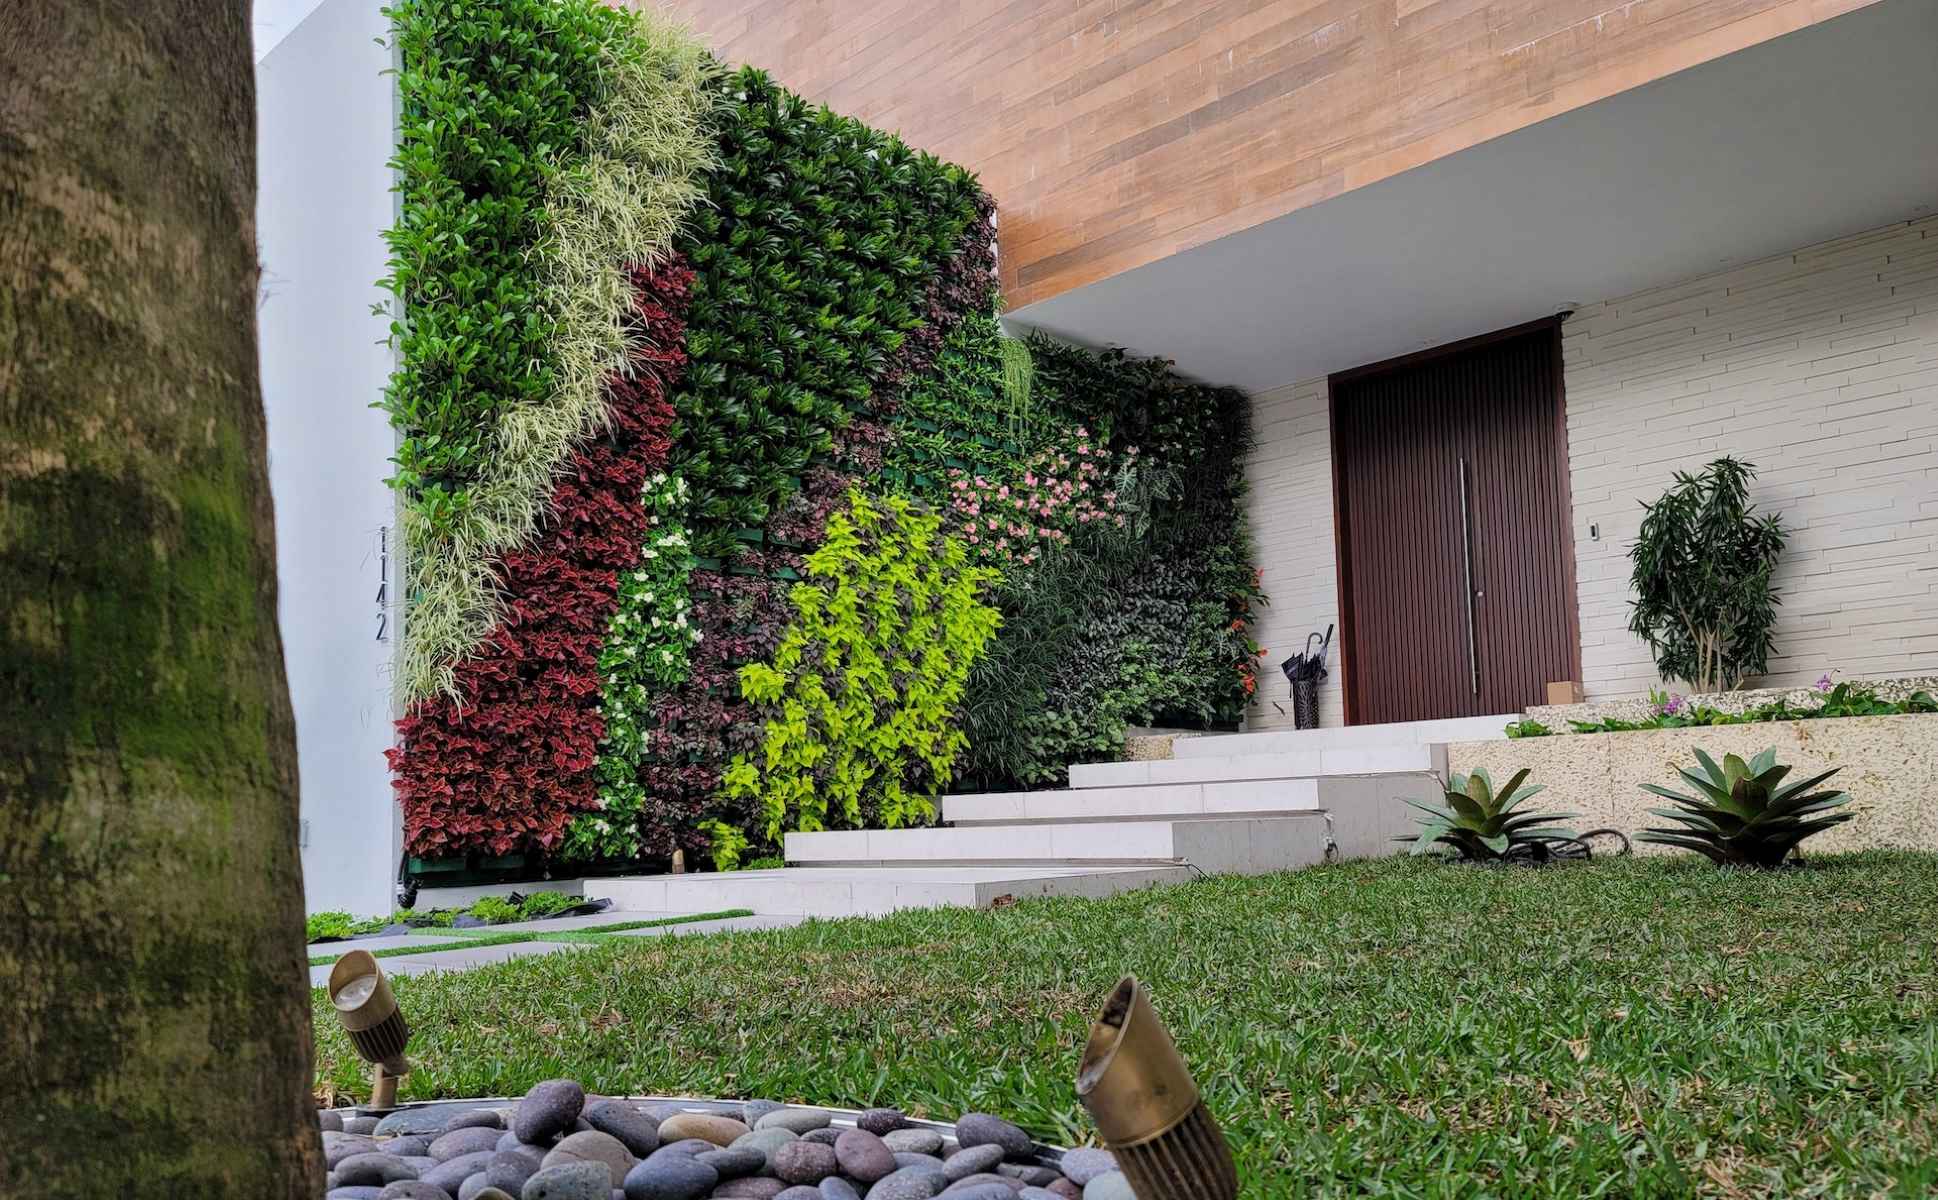 What Are The Best Plants To Grow In A Vertical Garden In Florida